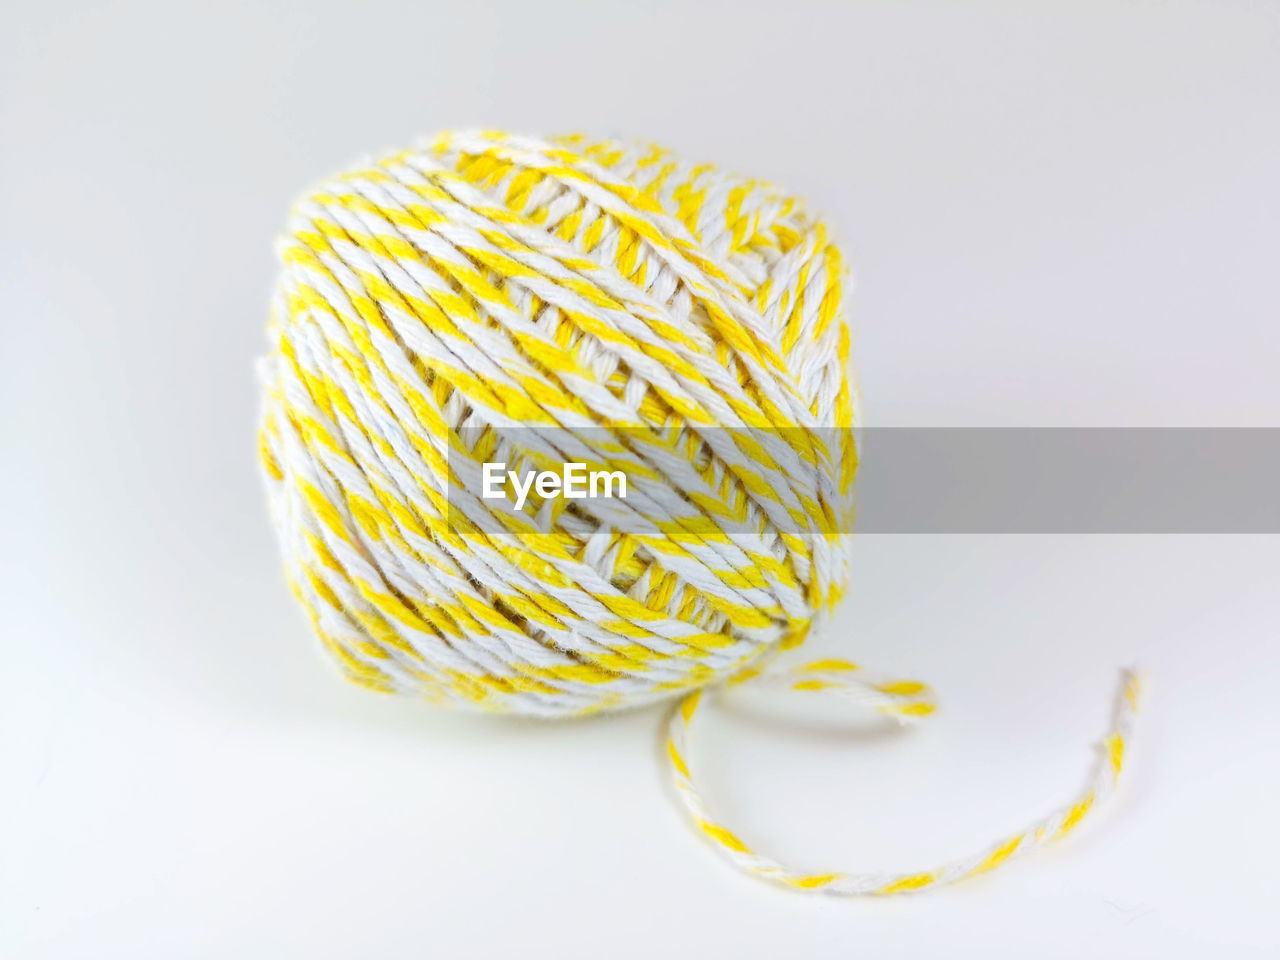 Ball of wool over white background